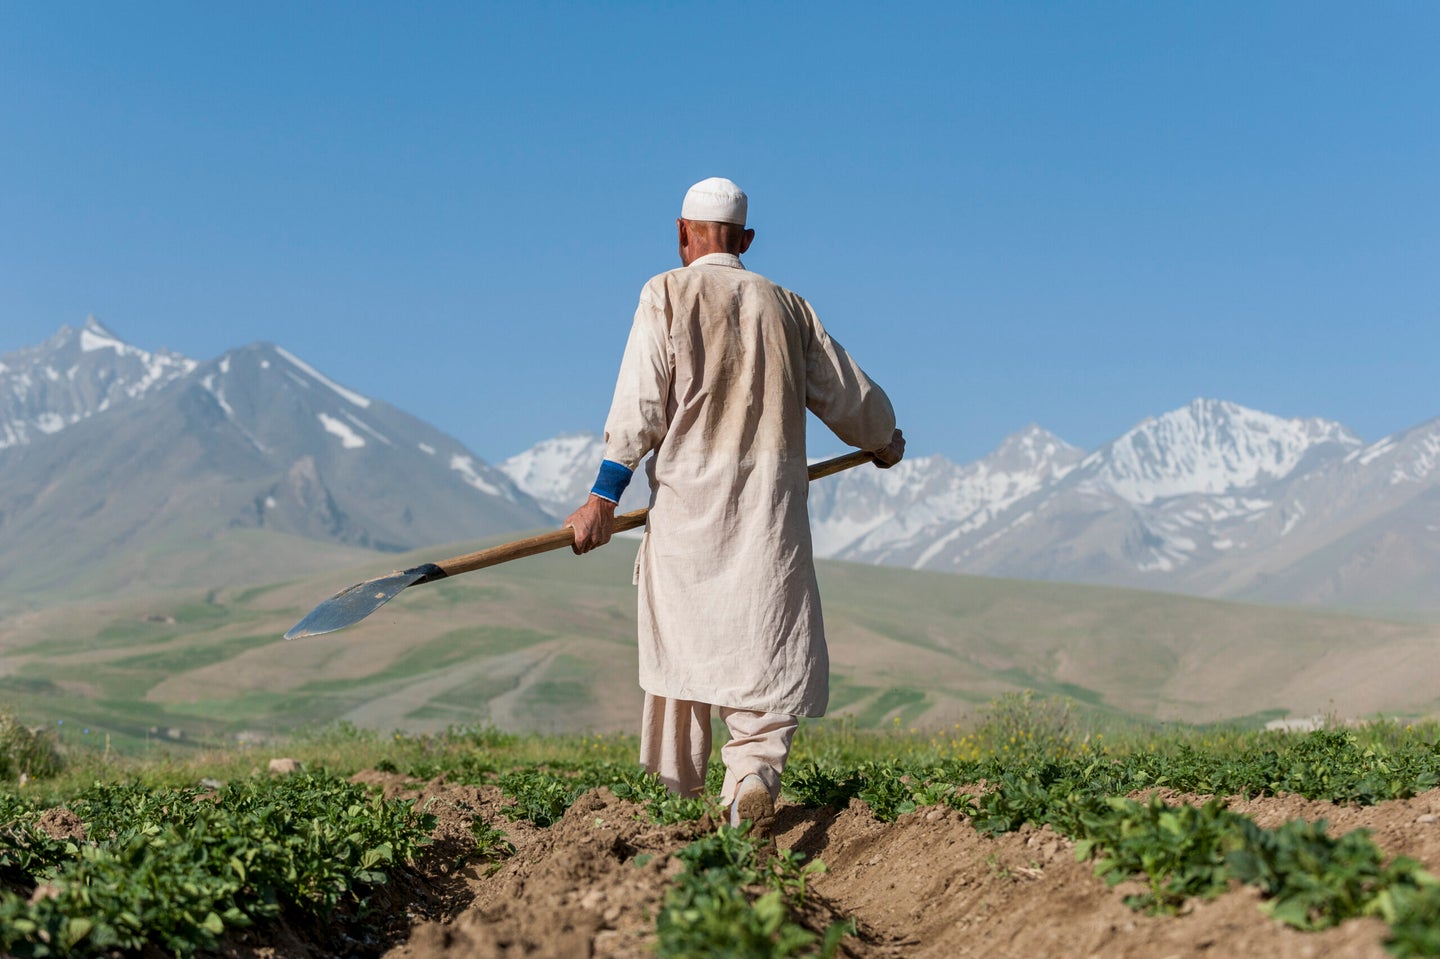 A potato farmer works in his fields in the Fulladi Valley with views of snow covered mountains in the distance